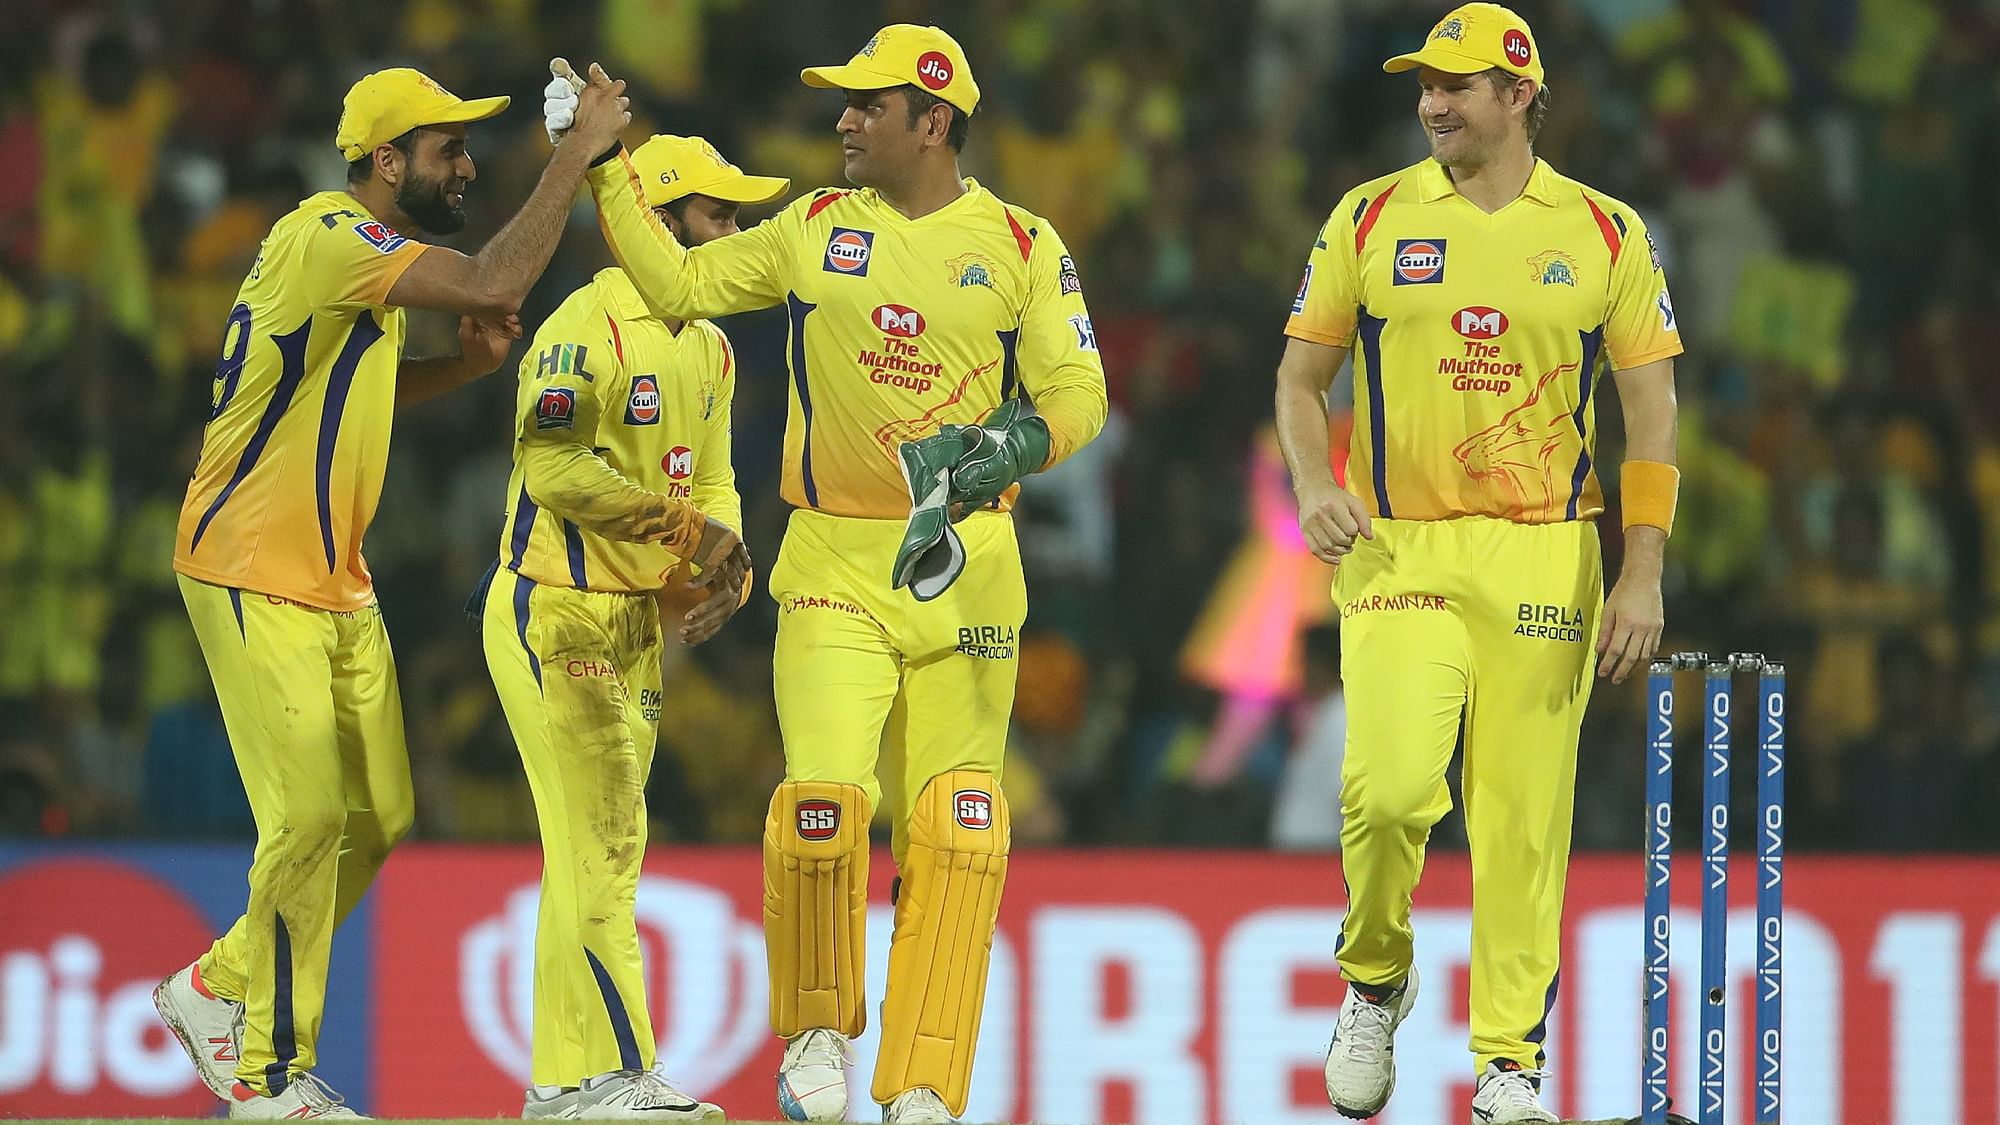 With this win, Chennai Super Kings go to the top of the table of IPL 2019.